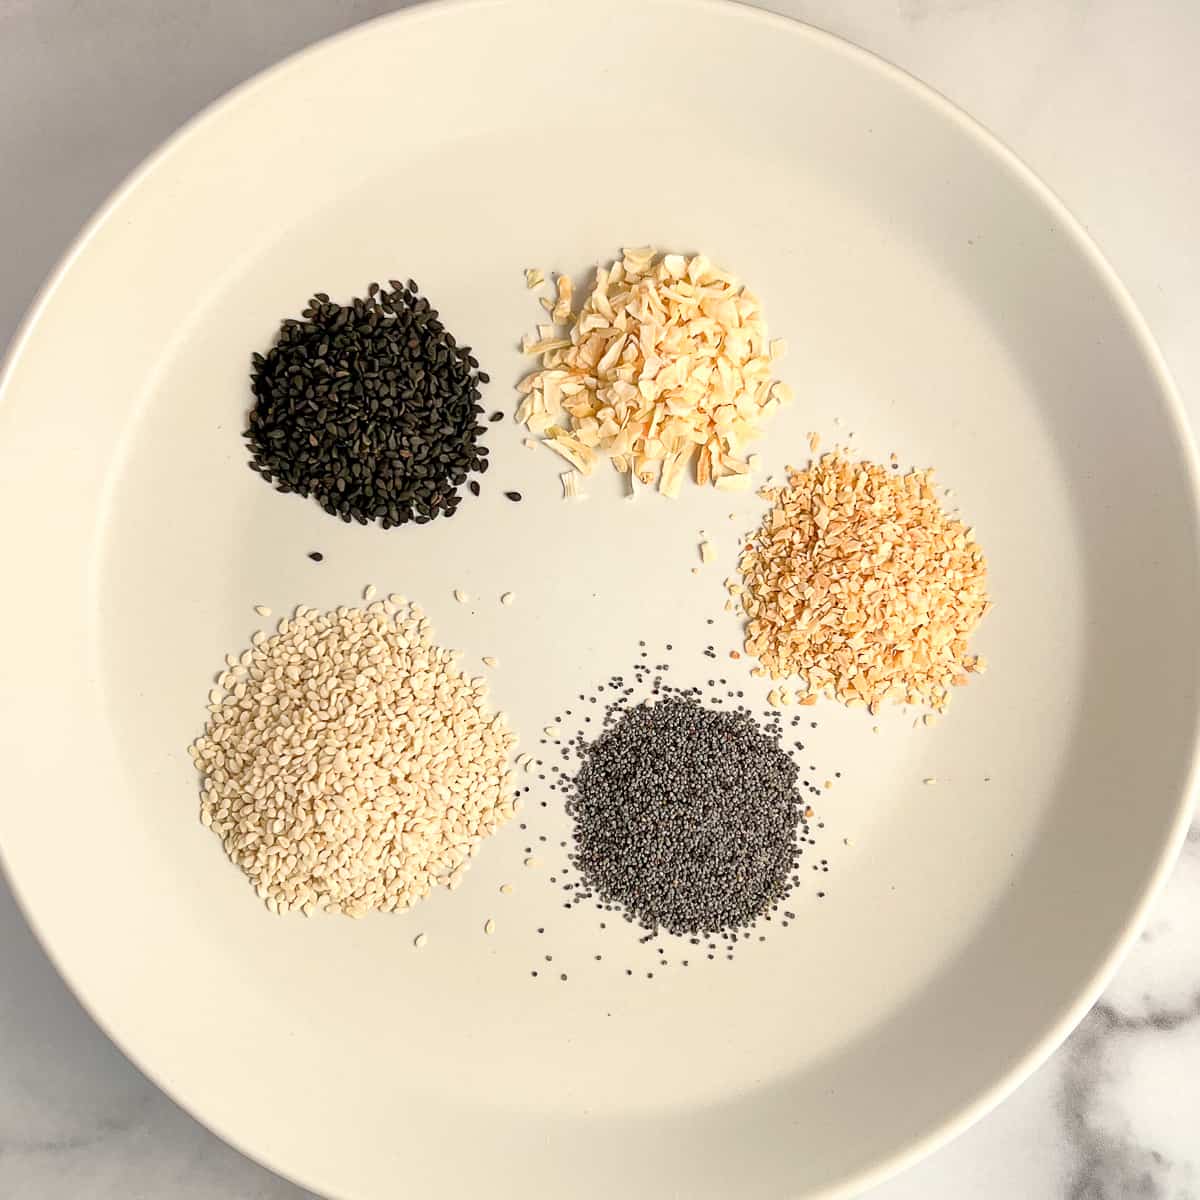 top view of a white plate with separated seasonings: black sesame seeds, white sesame seeds, poppy seeds, minced dried garlic, minced dried onion